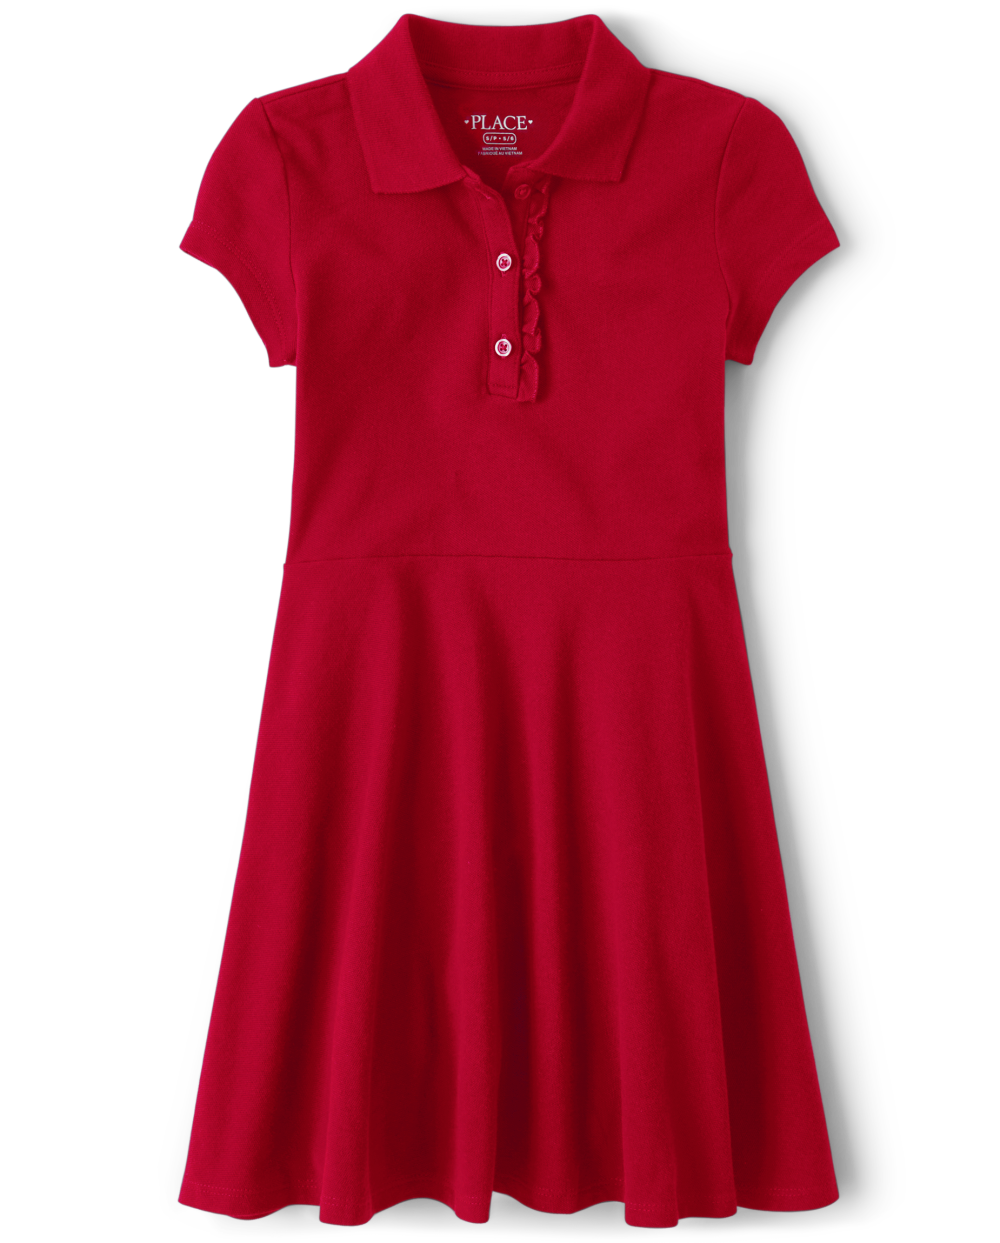 Girls Short Sleeves Sleeves Collared Ruffle Trim Above the Knee Dress